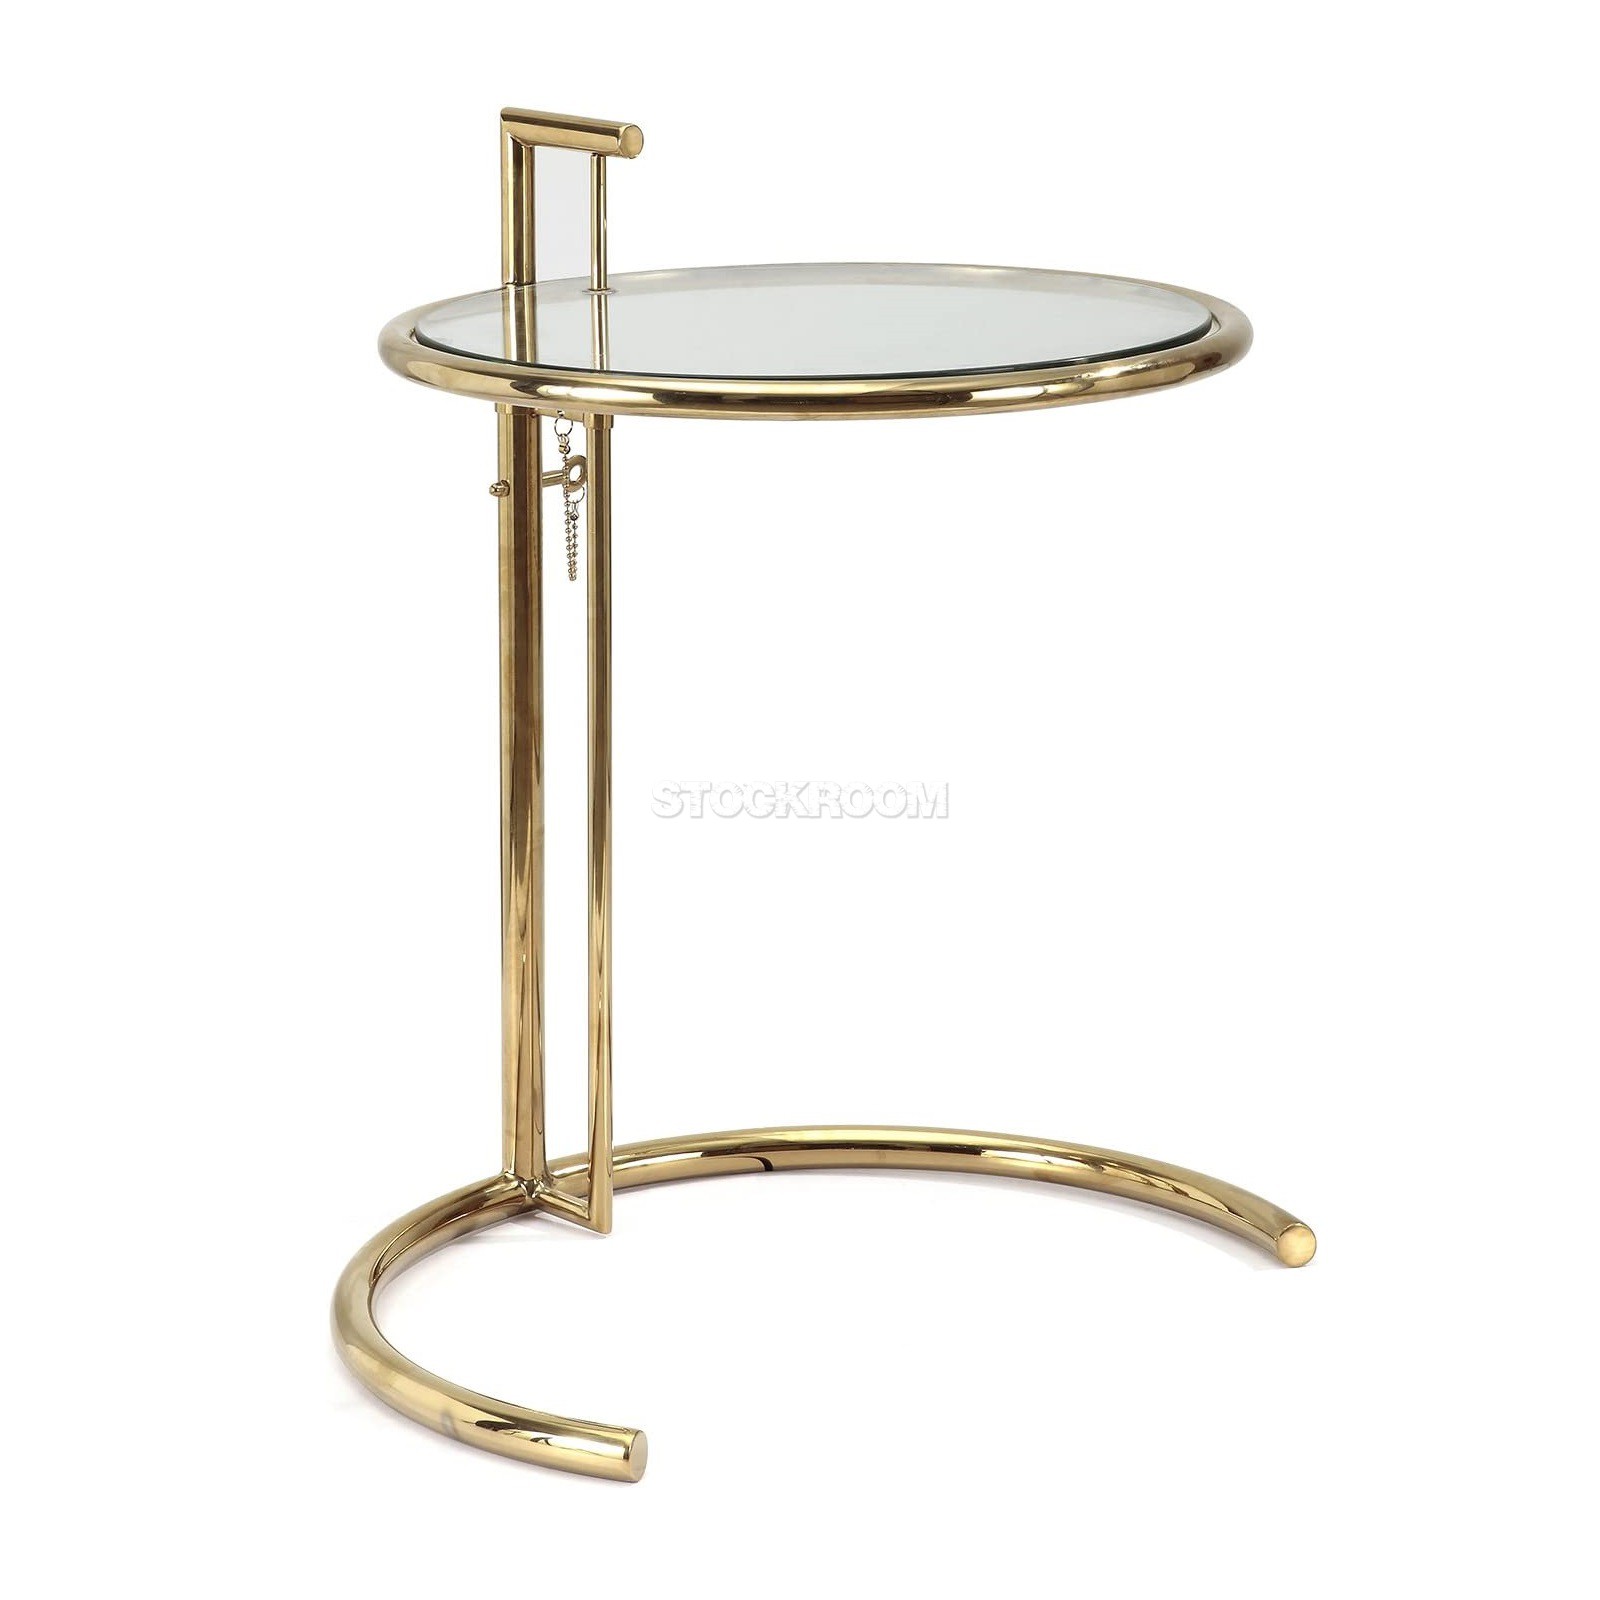 Eileen Gray Style Side Table - Gold